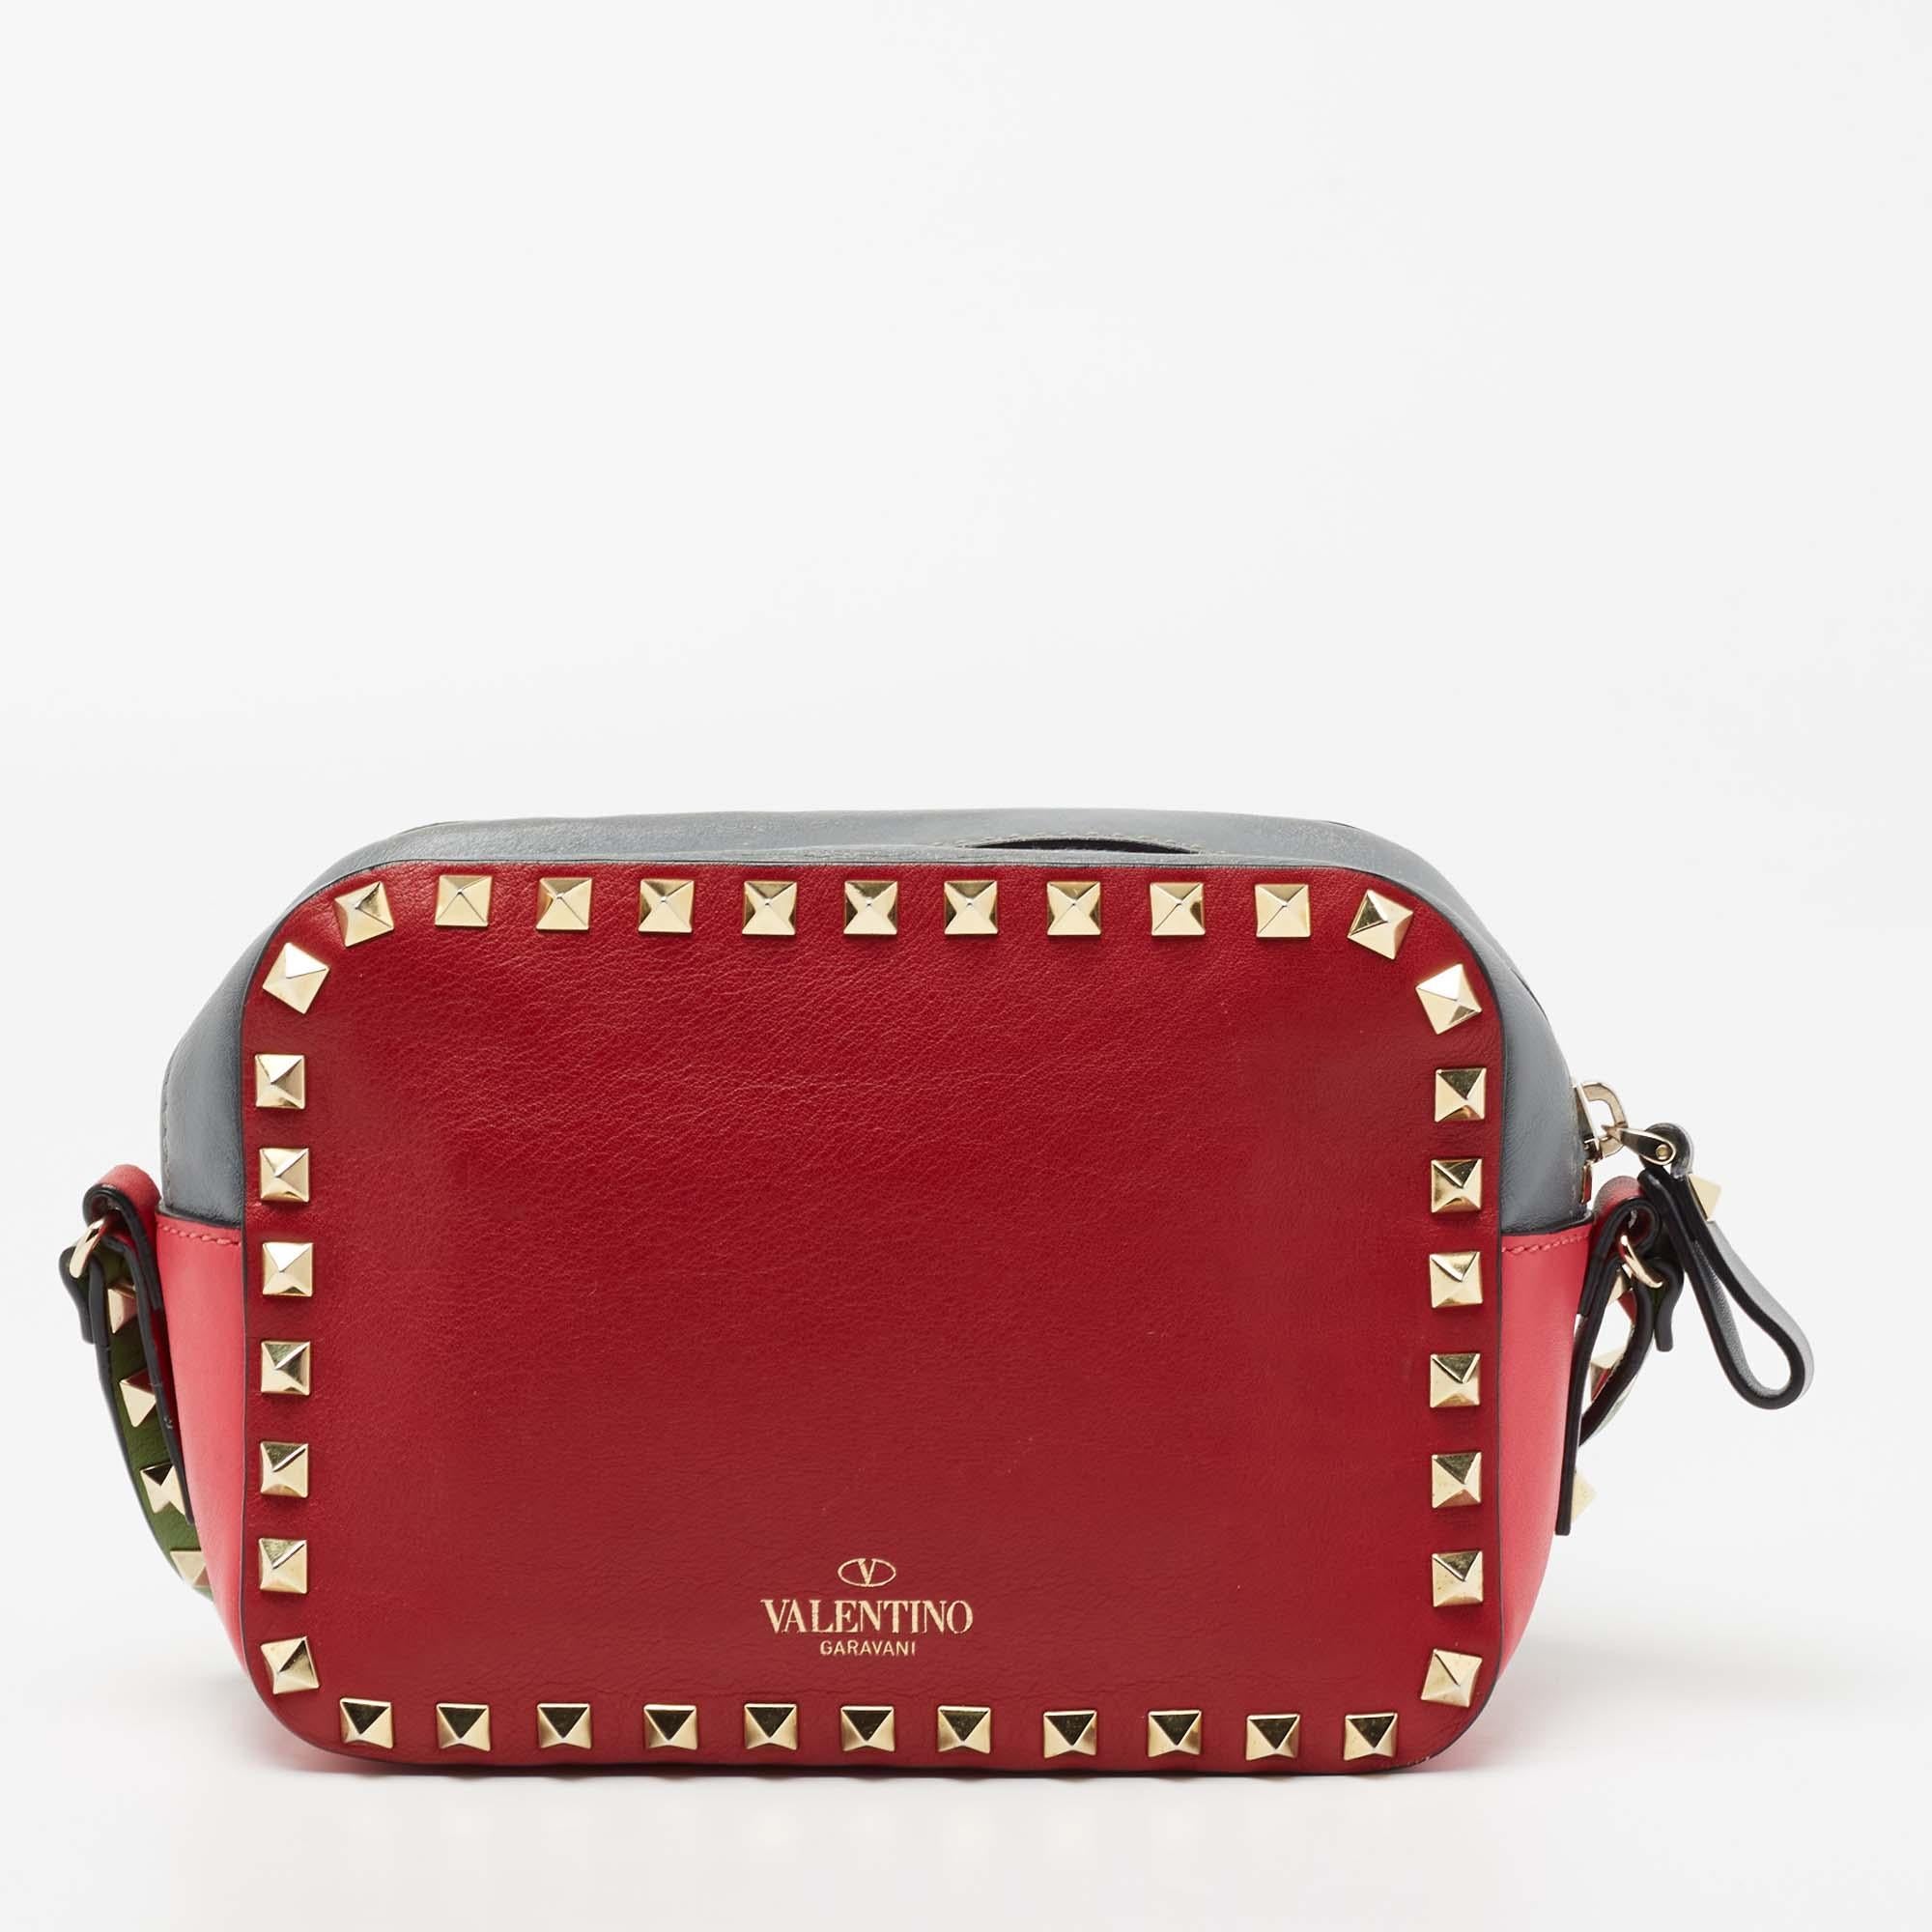 Bags are more than just a means to carry one's essentials. They express a woman's sense of style. Valentino brings you one such fabulous crossbody bag meticulously made from leather. It has a fabric interior secured by a zipper and flaunts the